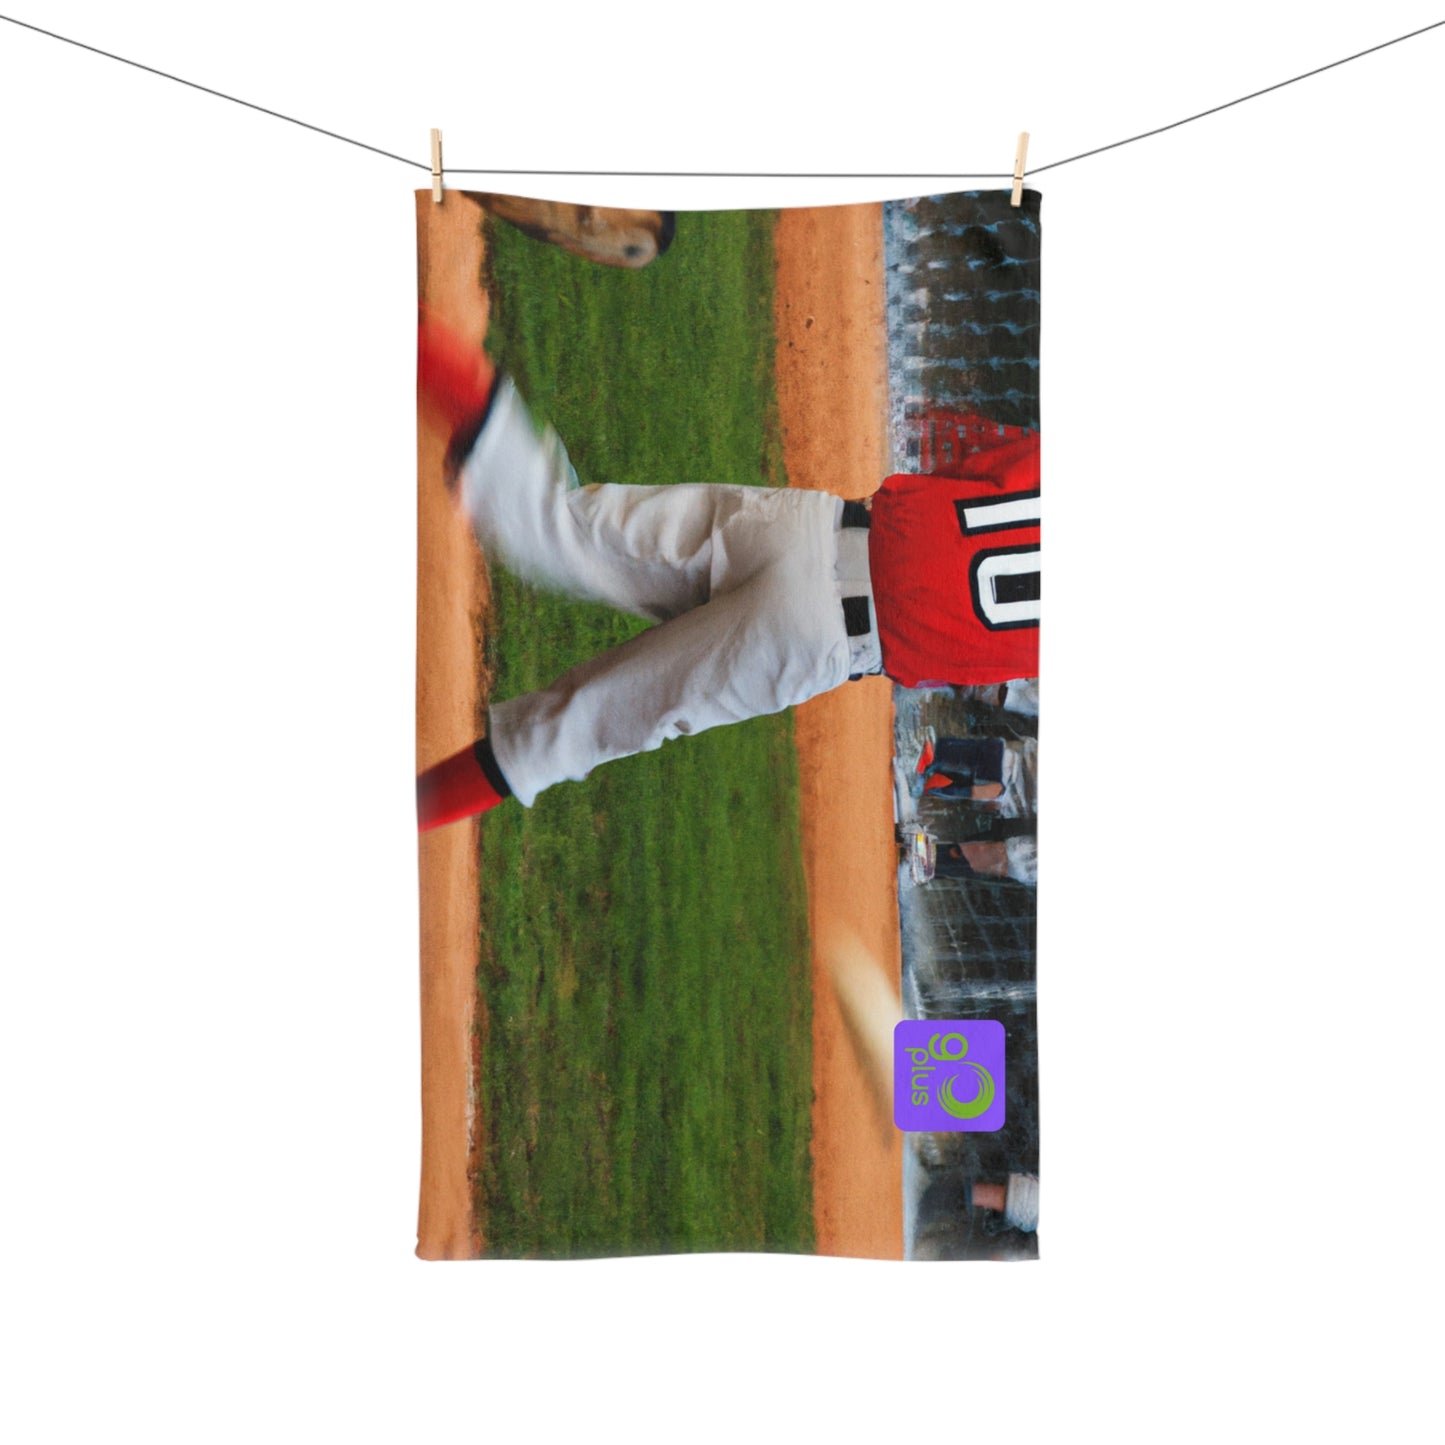 Call to Victory: Capturing the Spirit of Sports Through Dynamic Imagery - Go Plus Hand towel